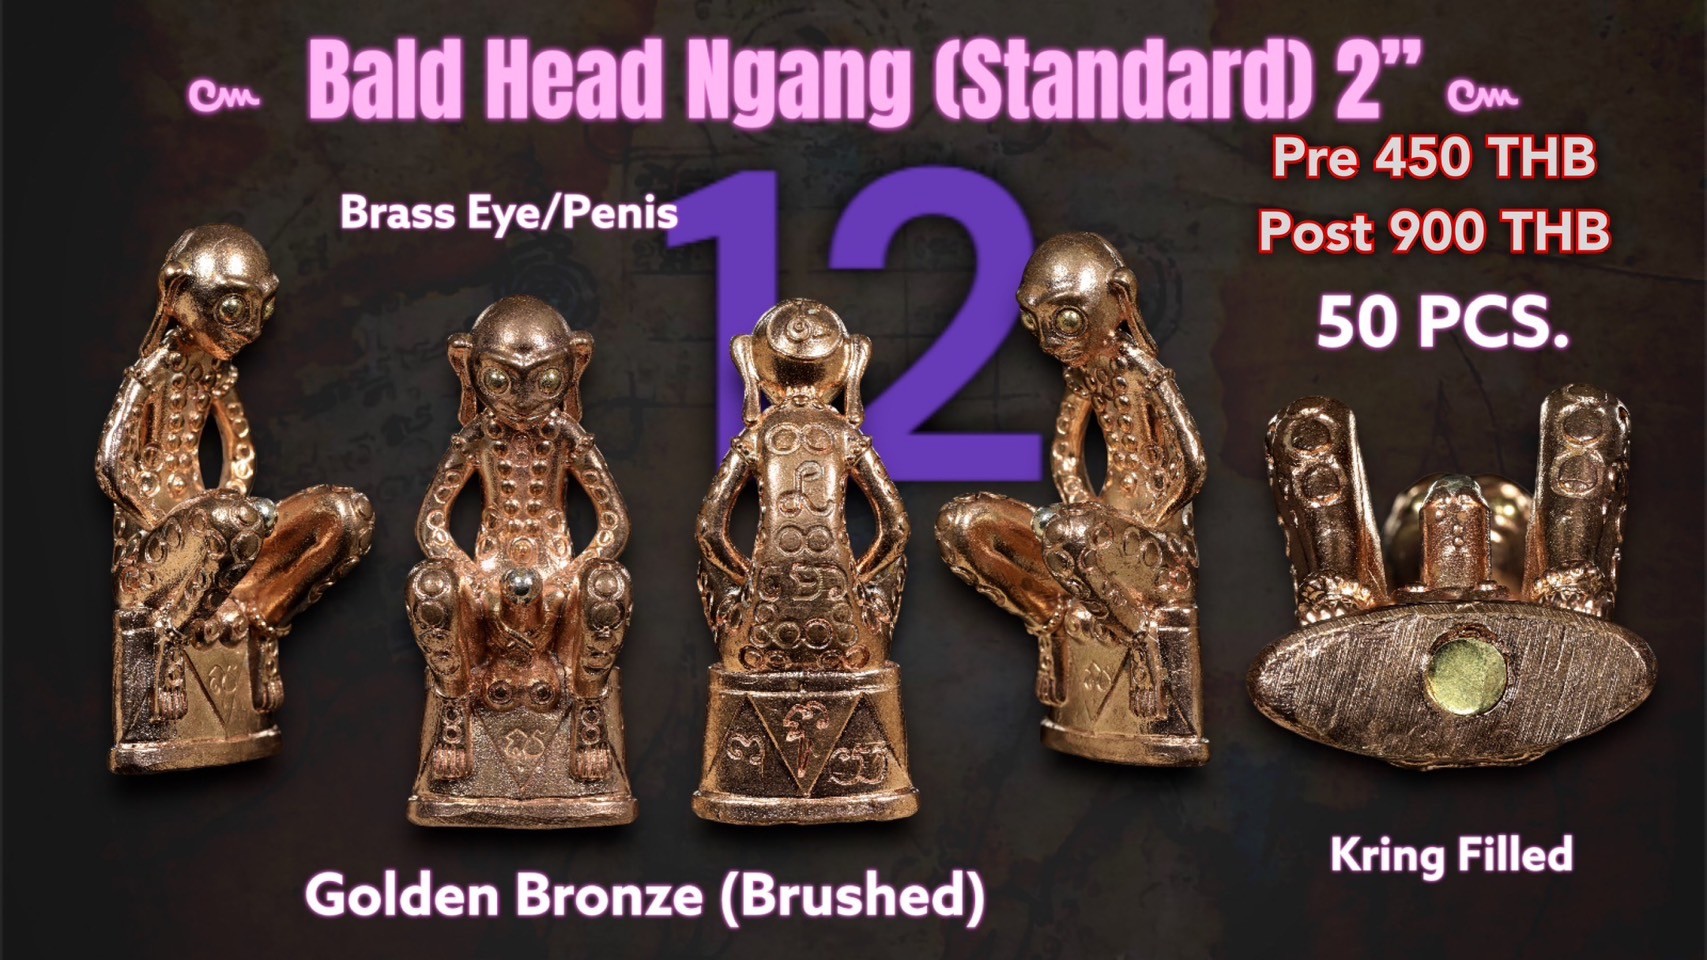 12.Bald Head Ngang Golden Bronze (Brushed) 2 inches